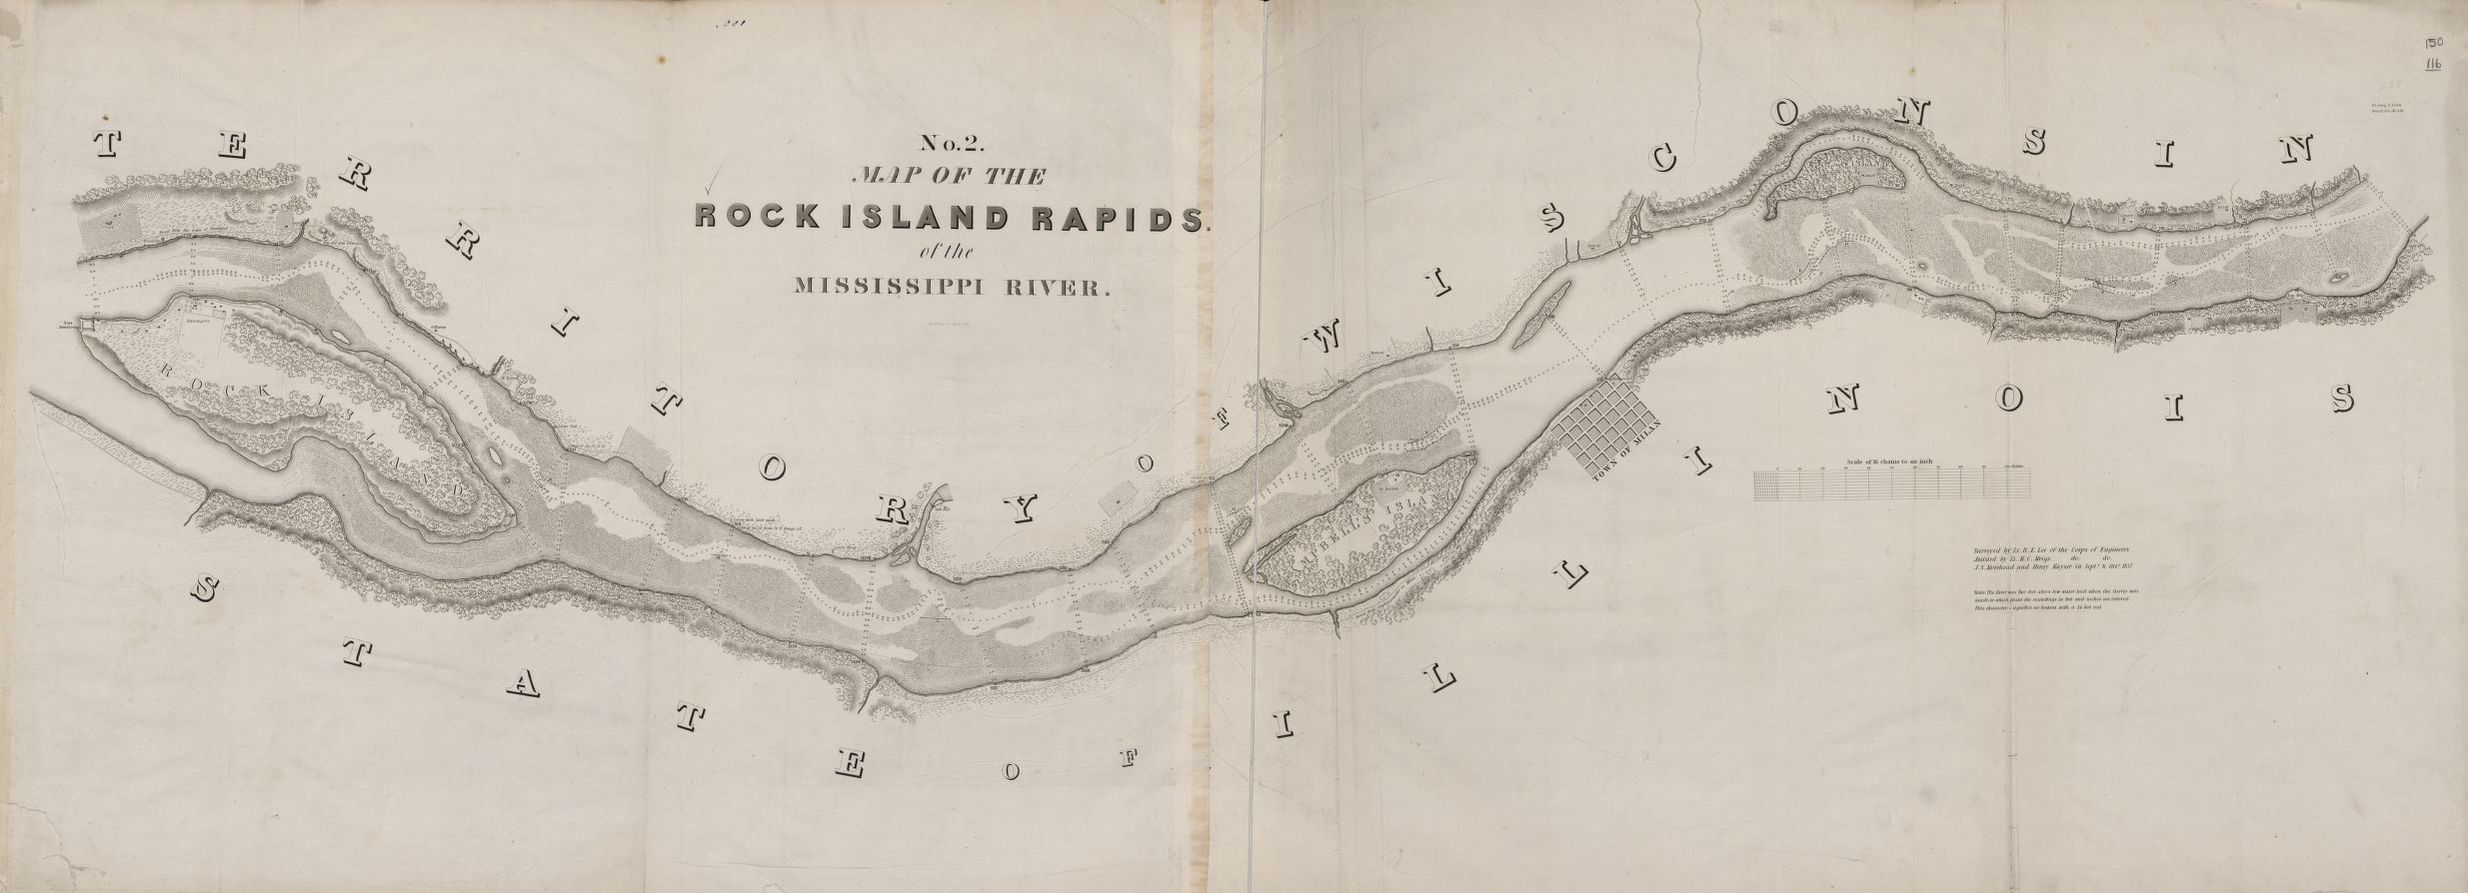 Rock Island Rapids, 1843, Credit Line: Library of Congress, Geography and Map Division.